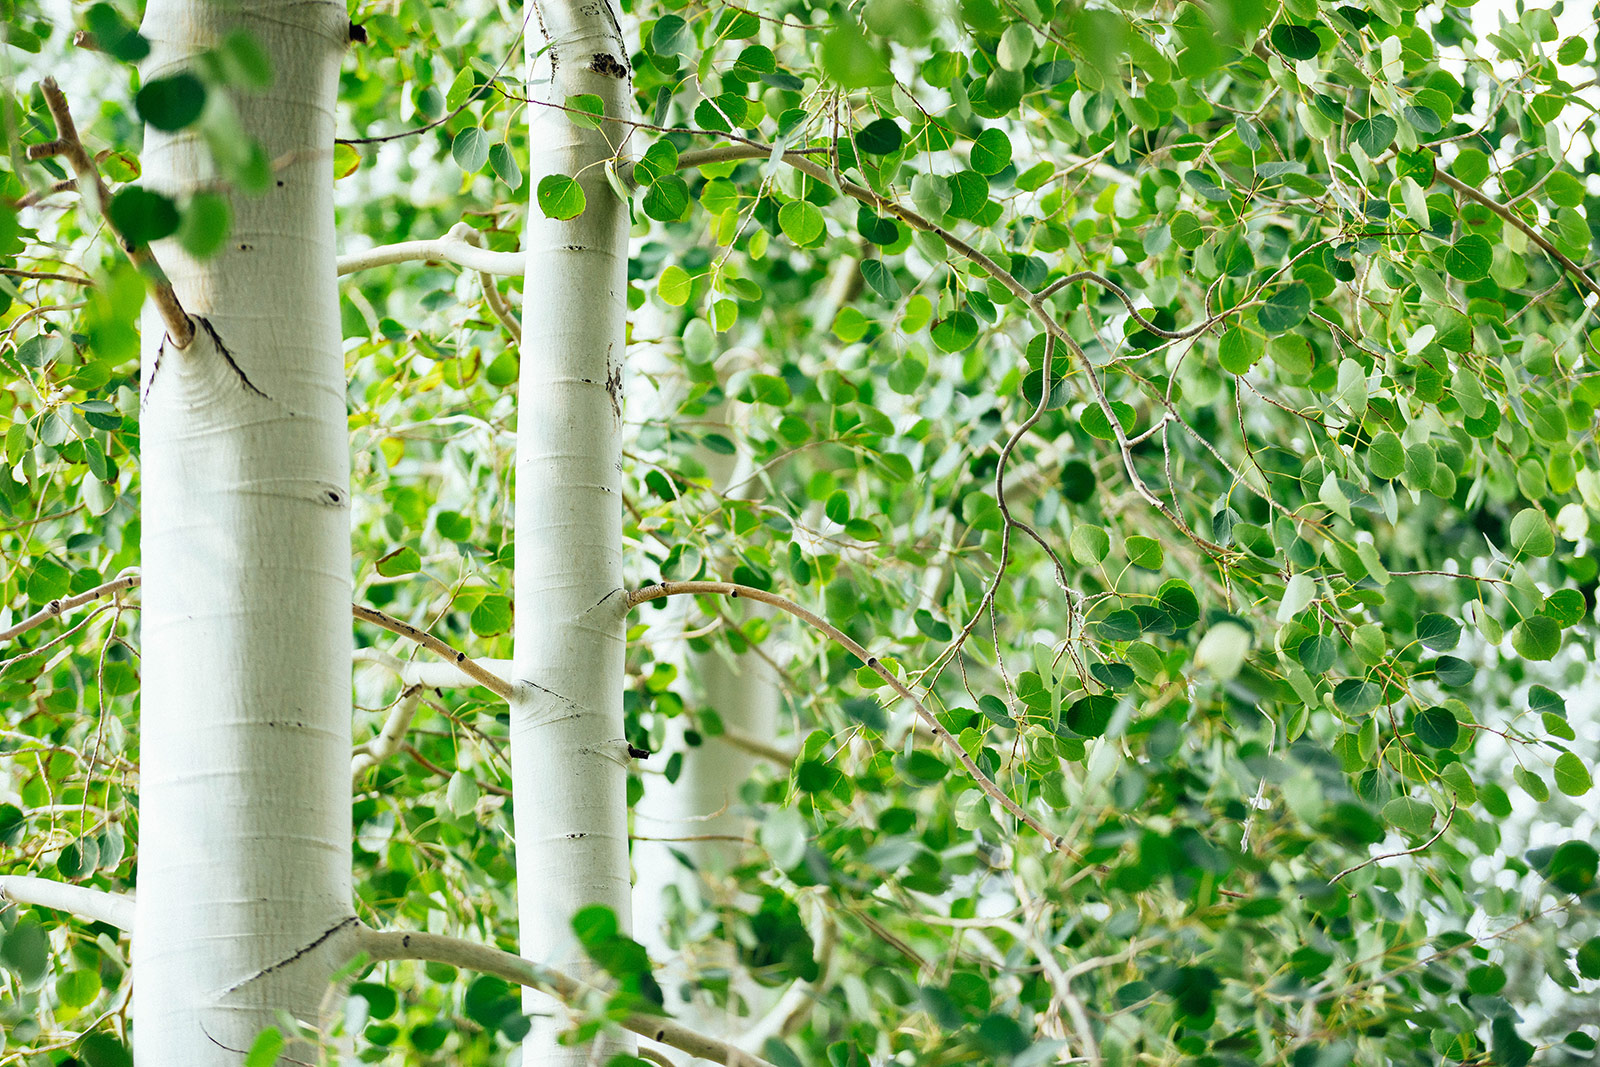 Close-up of fast-growing white quaking aspen tree trunks with lush green leaves